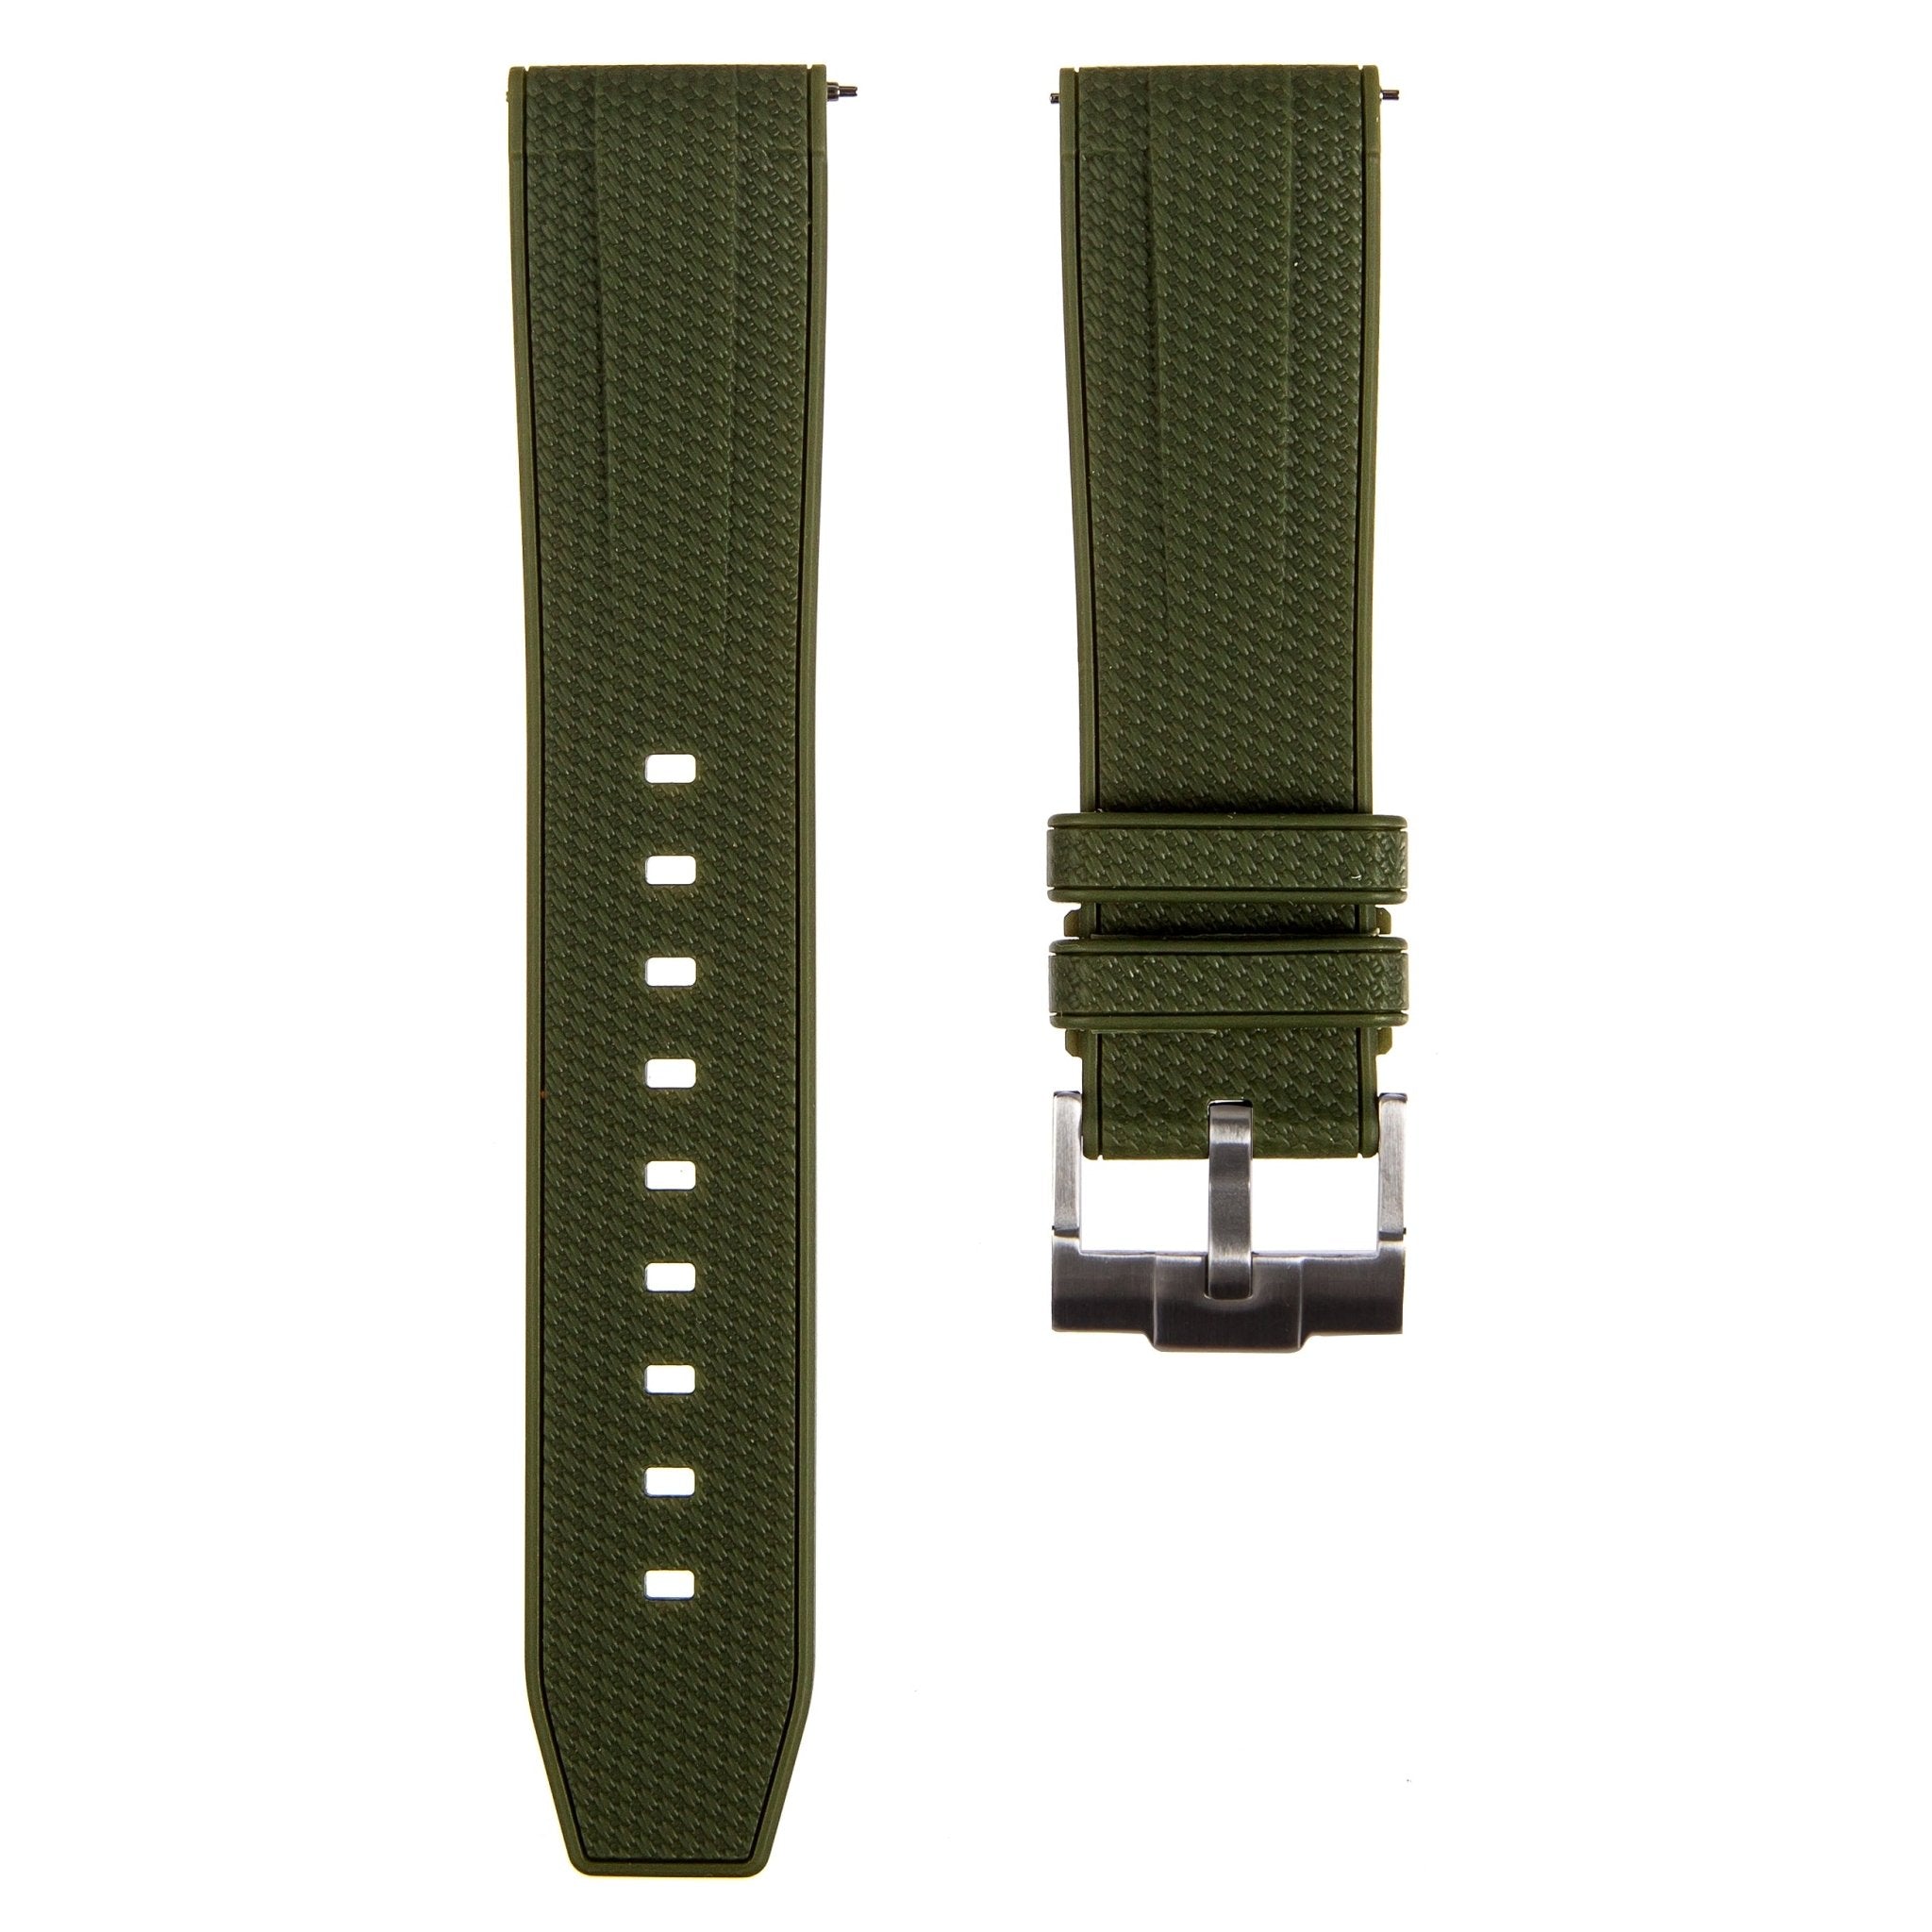 Flexweave Premium SIlicone Rubber Strap - Quick-Release - Compatible with Omega Moonwatch – Army Green (2423) -Strapseeker